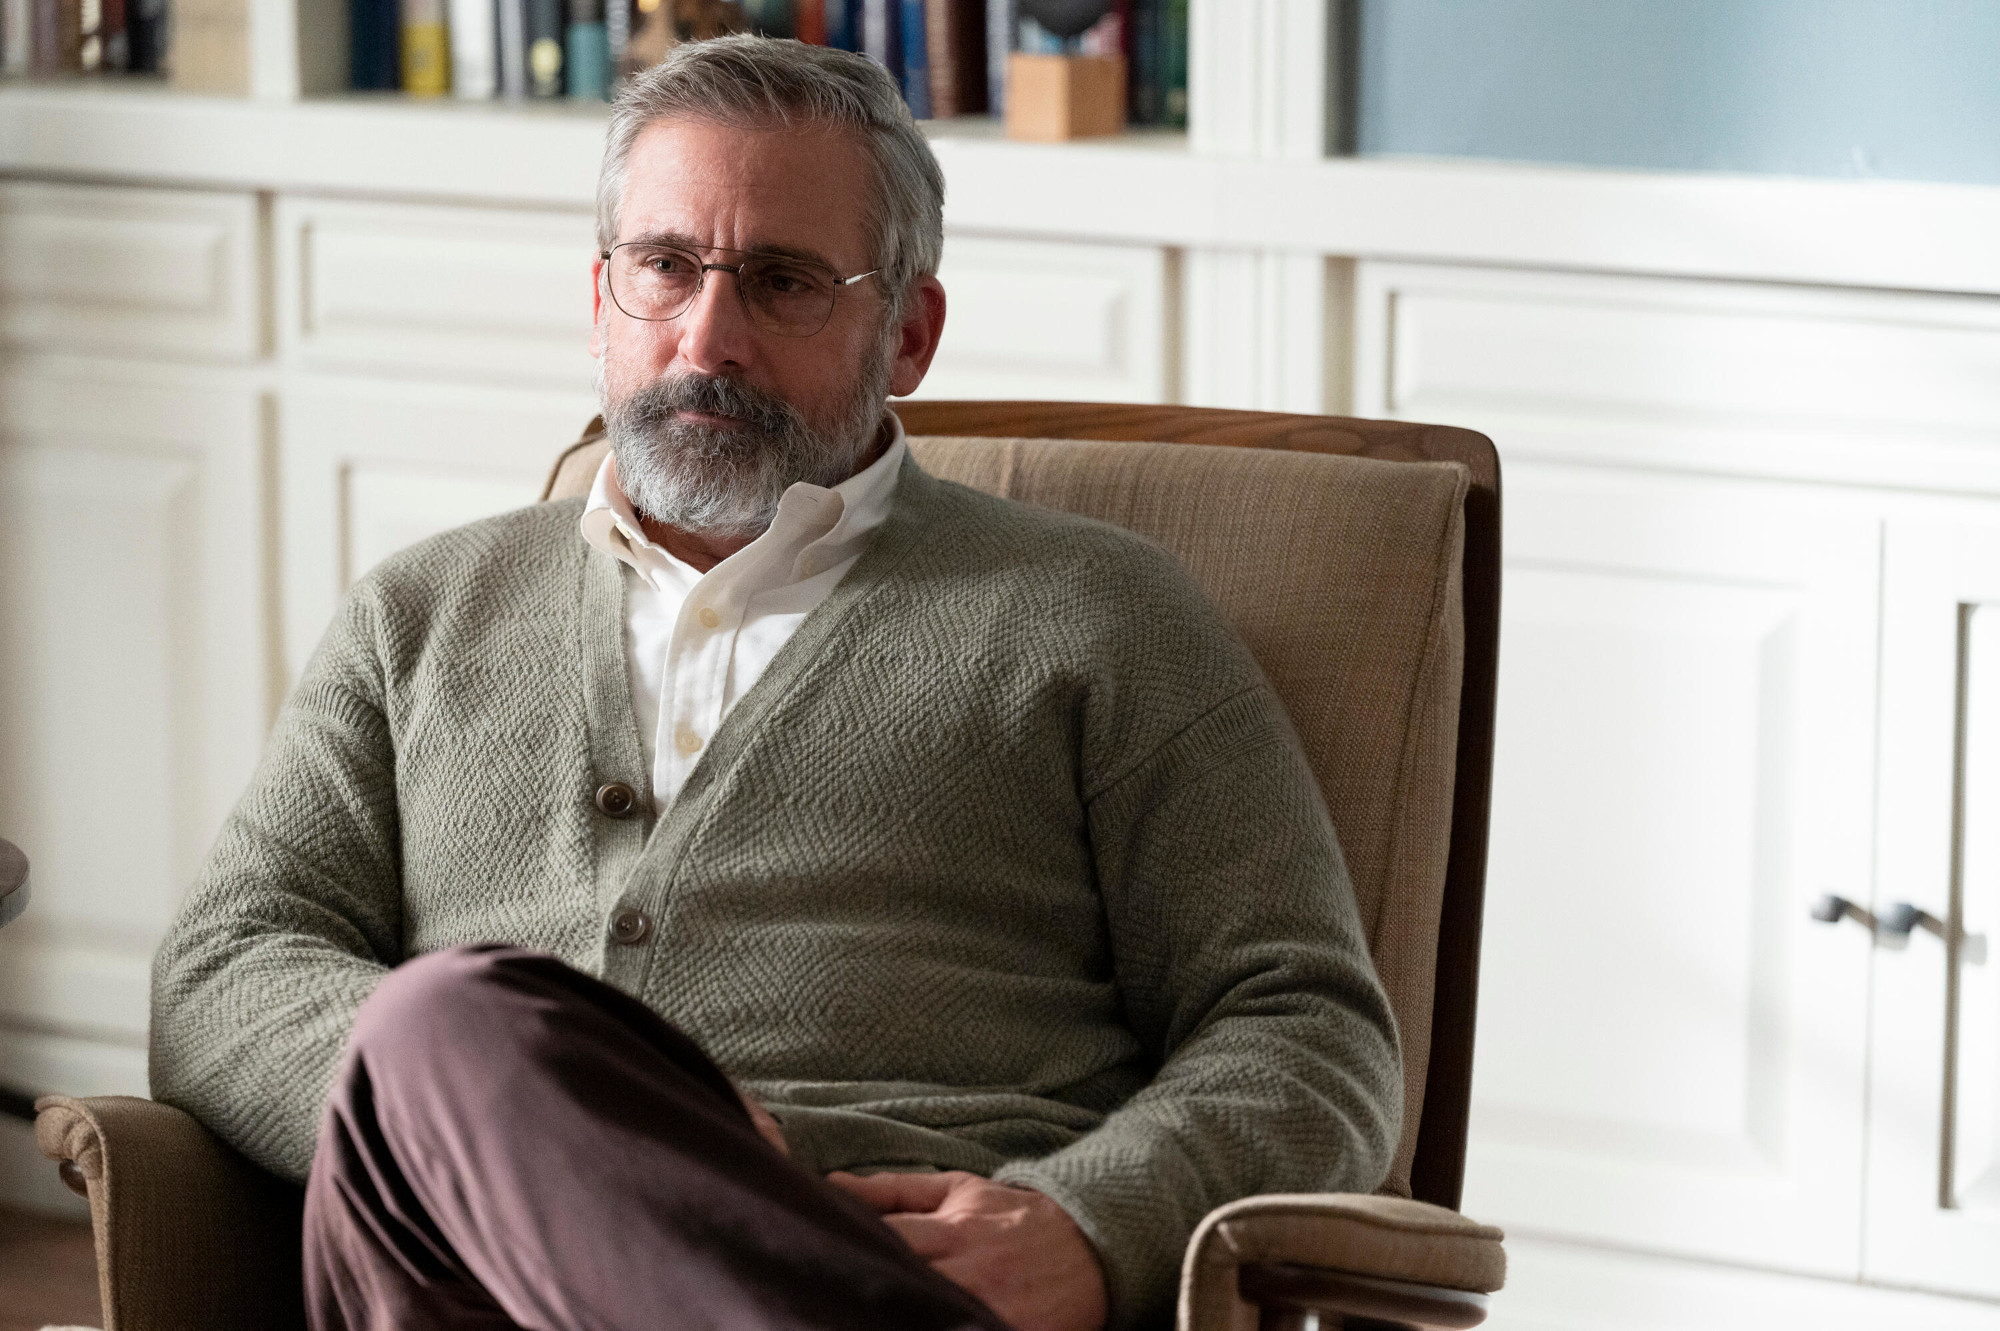 Steve Carell as Alan Strauss in 'The Patient' for our article about episode 5's release date and time on Hulu. He's sitting in his chair and wearing an olive sweater.